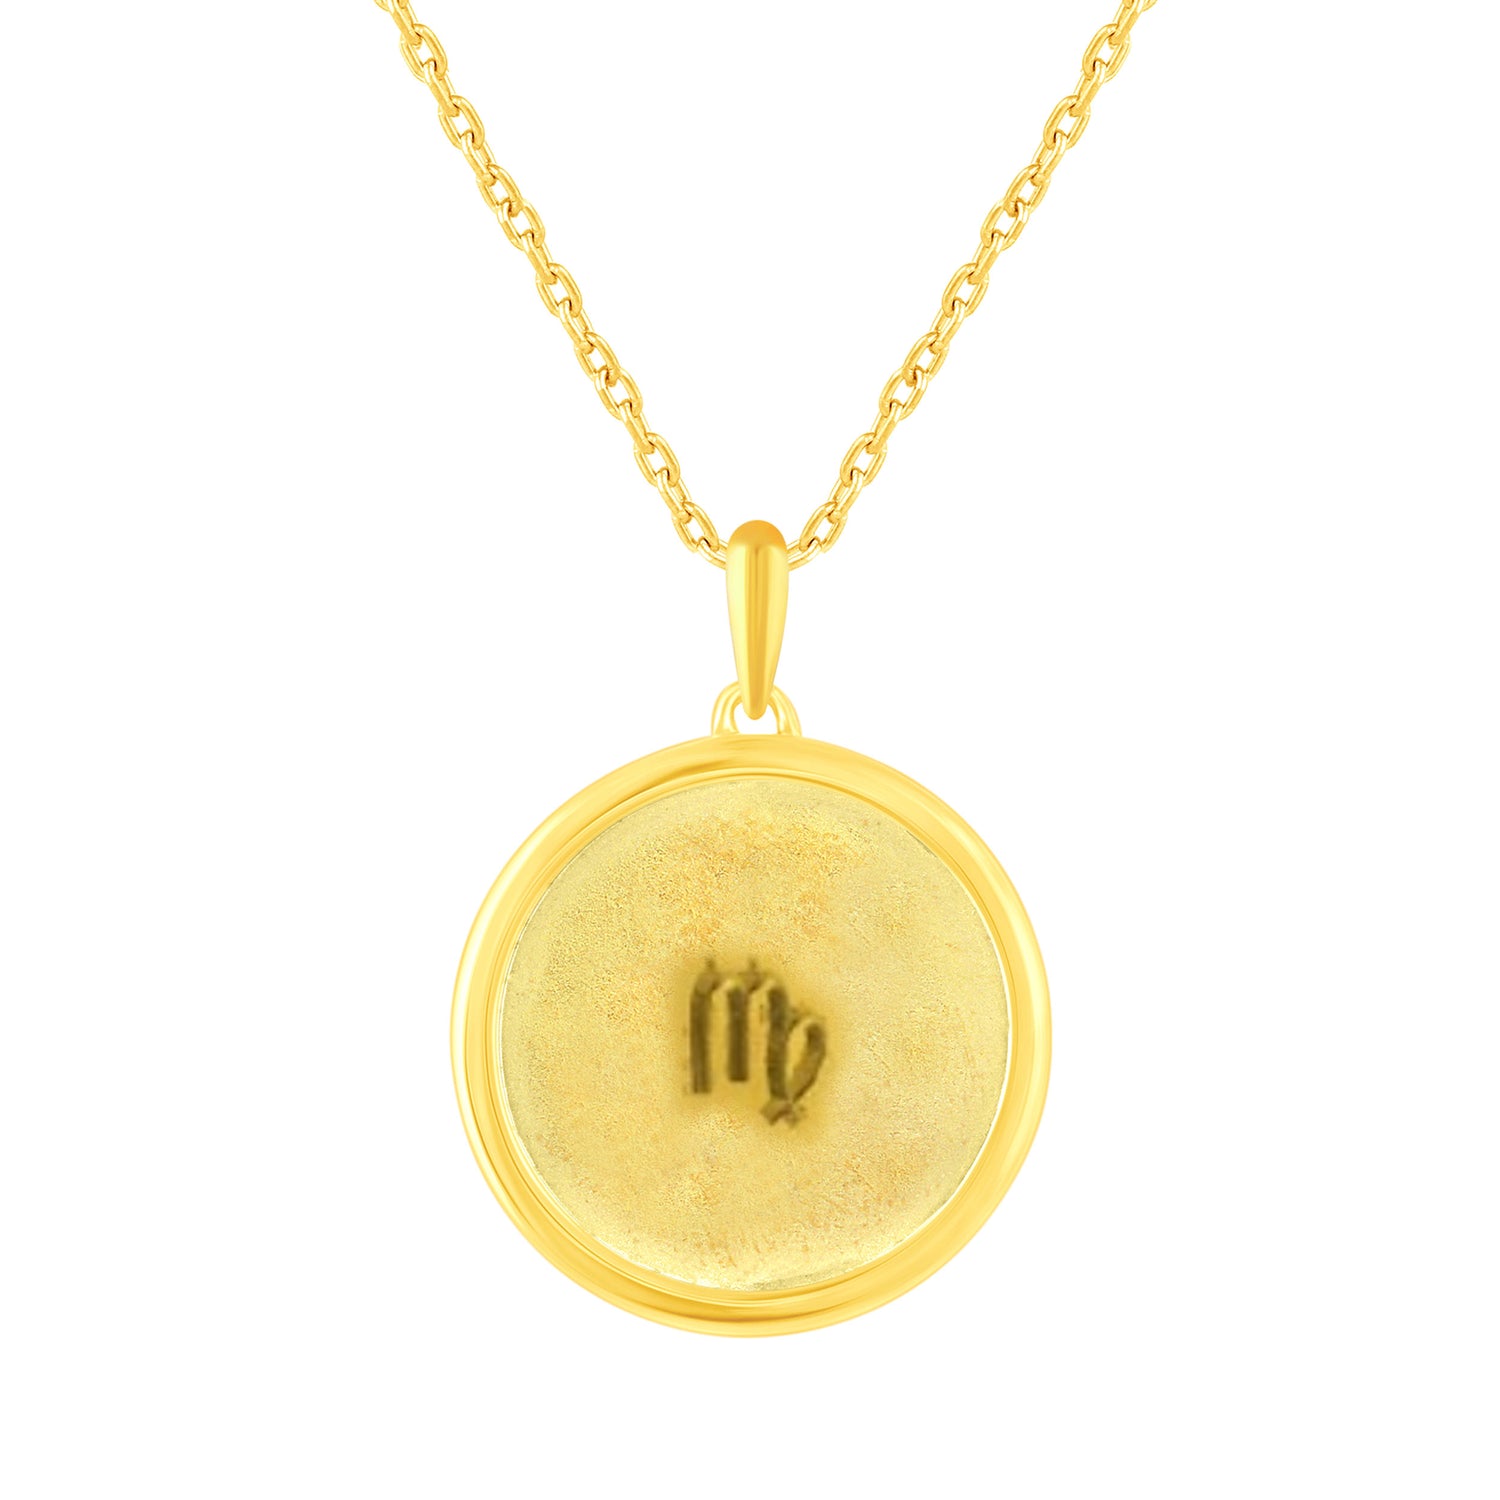 1/20 Cttw Diamond Virgo Zodiac Pendant Necklace set in 925 Sterling Silver 14K Yellow Gold Plating